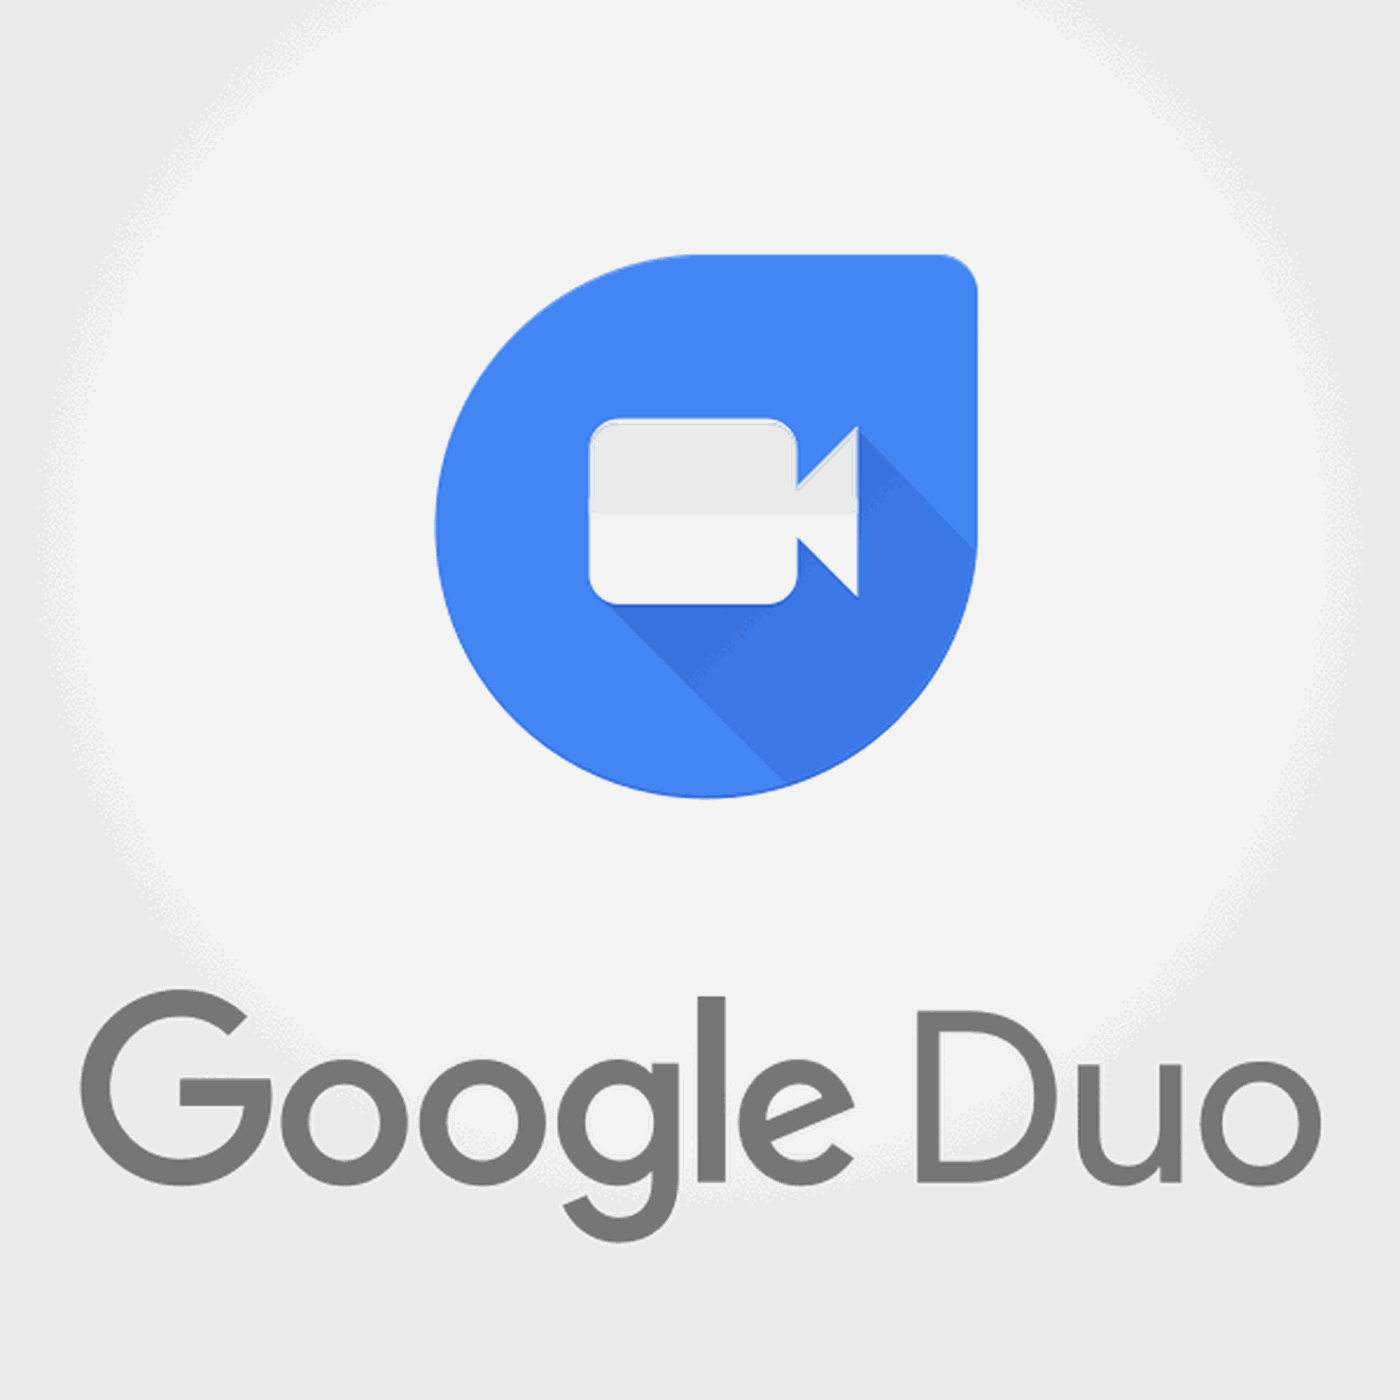 download an old app of duo mobile